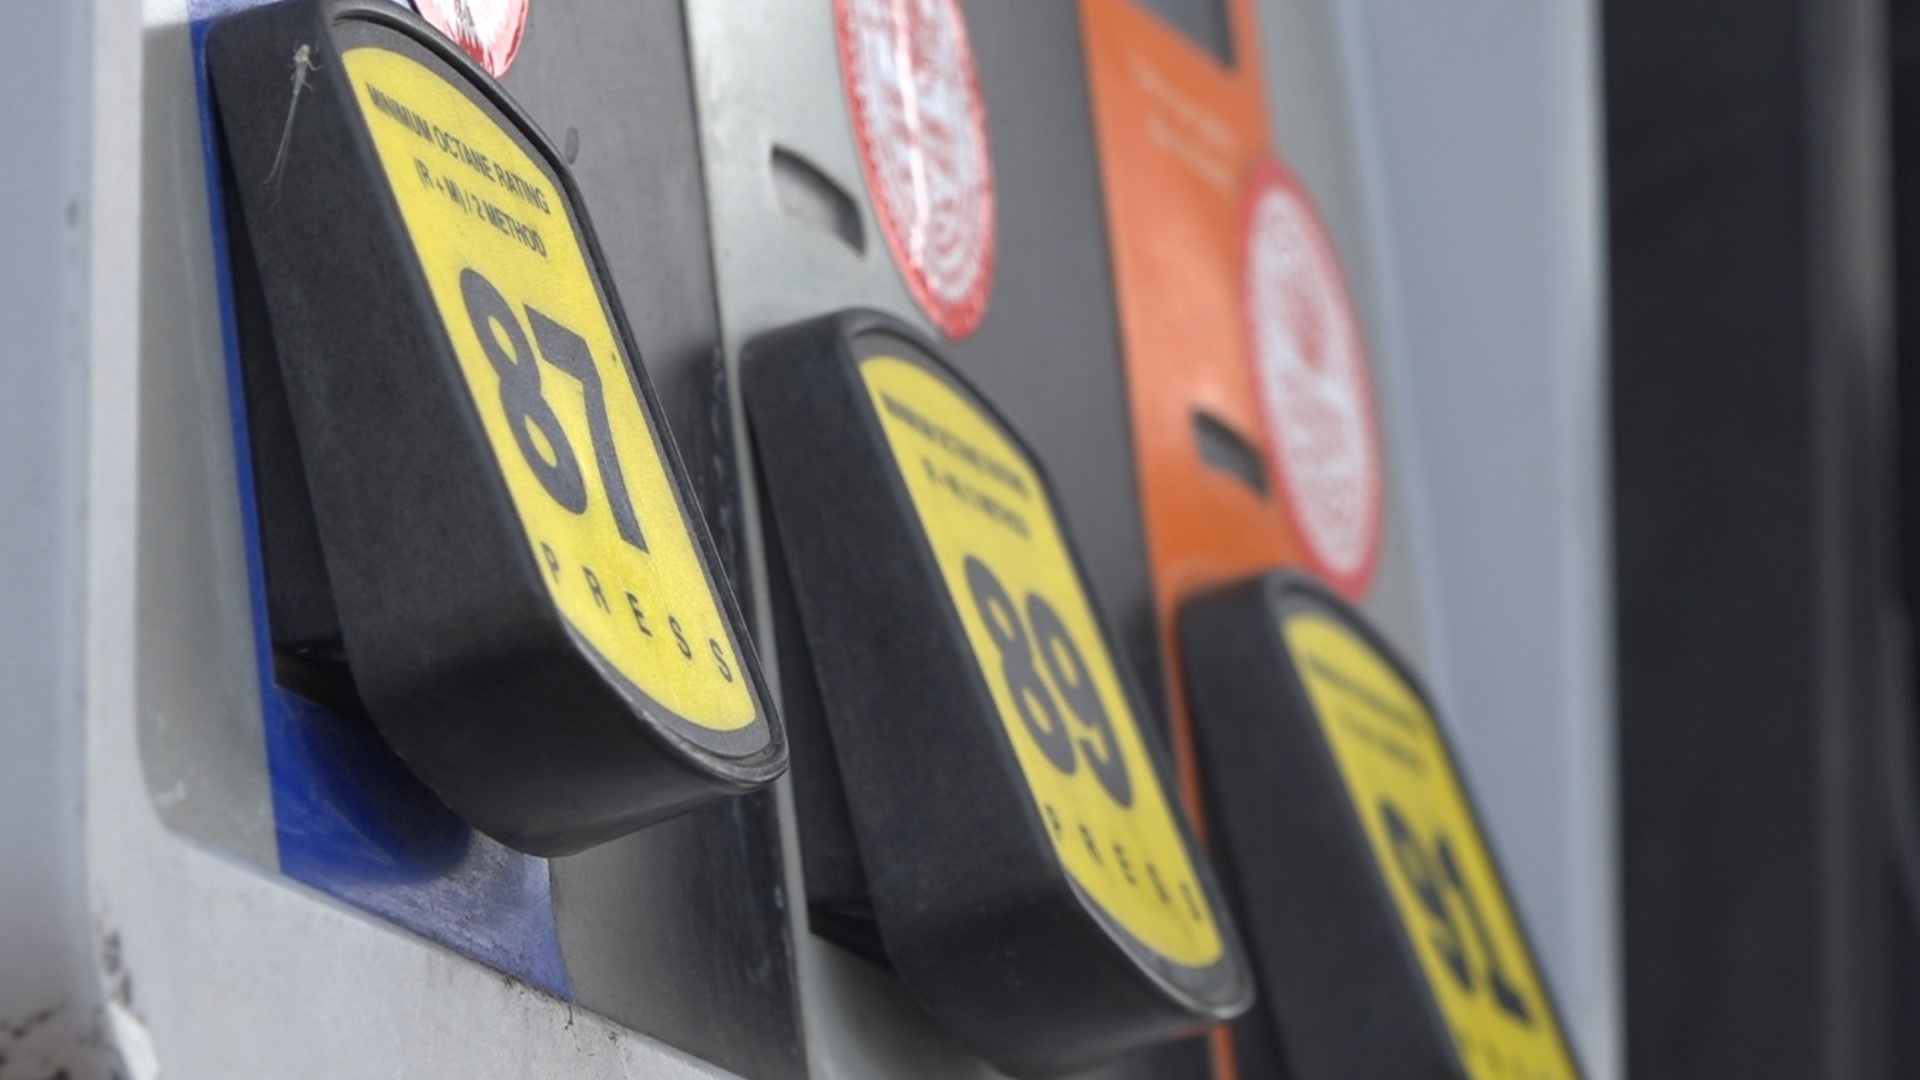 Sacramento drivers have been watching the gas prices drop and getting some relief from high prices.